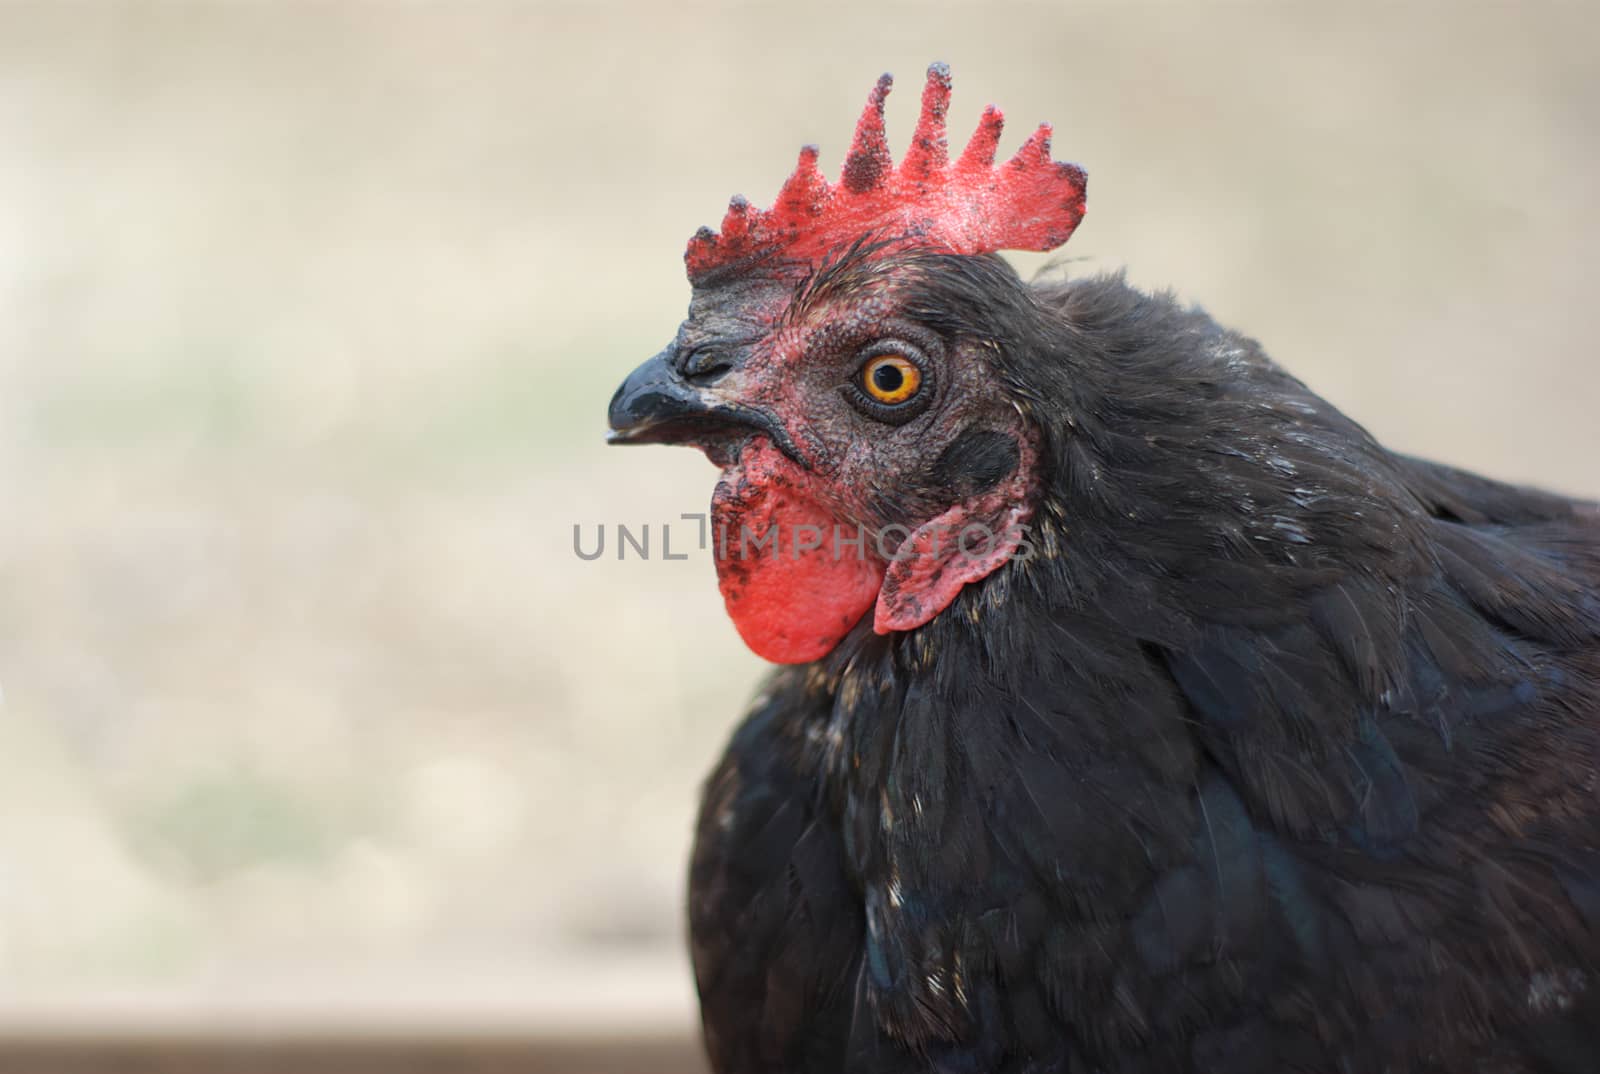 black chicken hen close up side view by jacquesdurocher